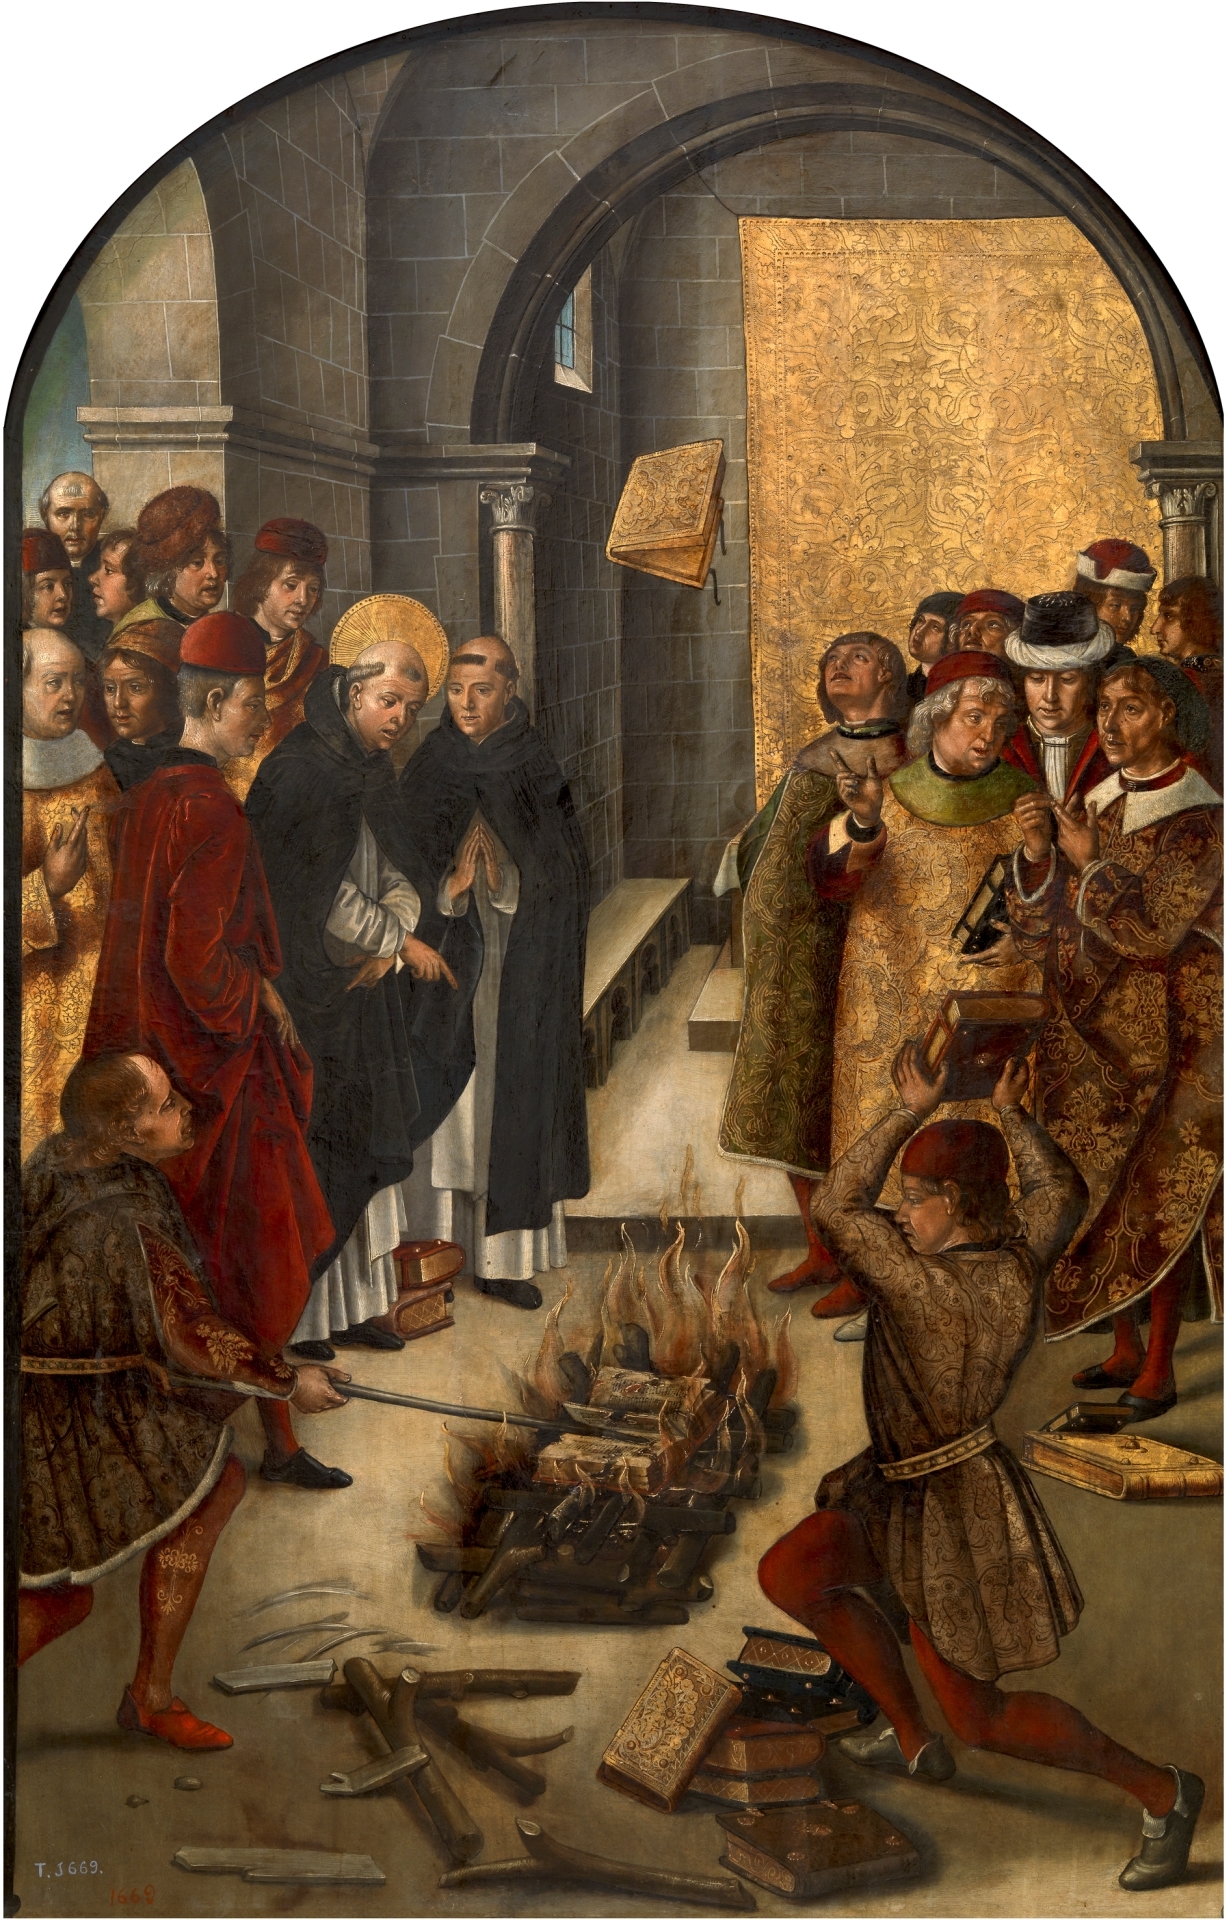 The burning of books condemned by the Inquisition.